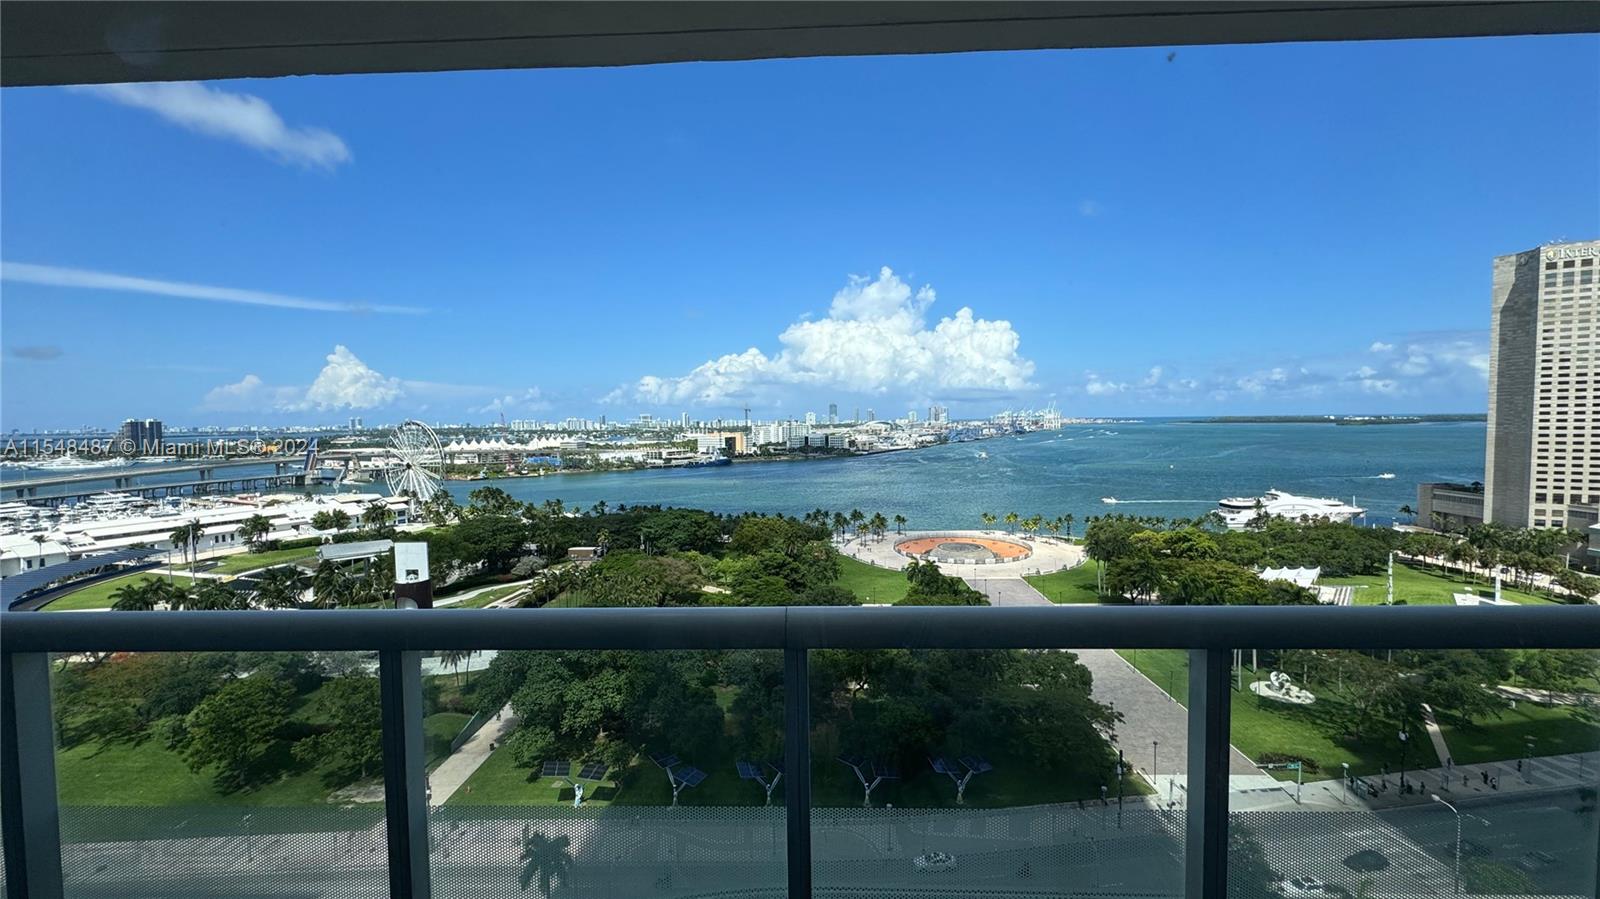 Unfurnished or partially furnished, 2BR+Den( Converted to a 3rd BD), 2 full Bath 1,322 SF apartment at 50 Biscayne w/direct EAST view & floor-to-ceiling windows from every room. Unit features spacious a split floor-plan, large bedrooms both w/ensuite & walk-in closets; open concept kitchen, living/dining rooms. Amenities include: 24-hour concierge, security & valet parking, infinity-edge pool & poolside cabanas, hot tub, formal & informal clubrooms with kitchen, billiards table, wet bar & media center, state-of-the-art fitness center, yoga/pilates room, sauna & steam rooms. Walking distance to Shops at Bayside, AAArena, lots of restaurants, Arsht Center, Whole Foods & Brickell. By car, 50 Biscayne is just 10 min from South Beach, 15 min. from Wynwood,  20 min. from the Miami Int'l Airport.